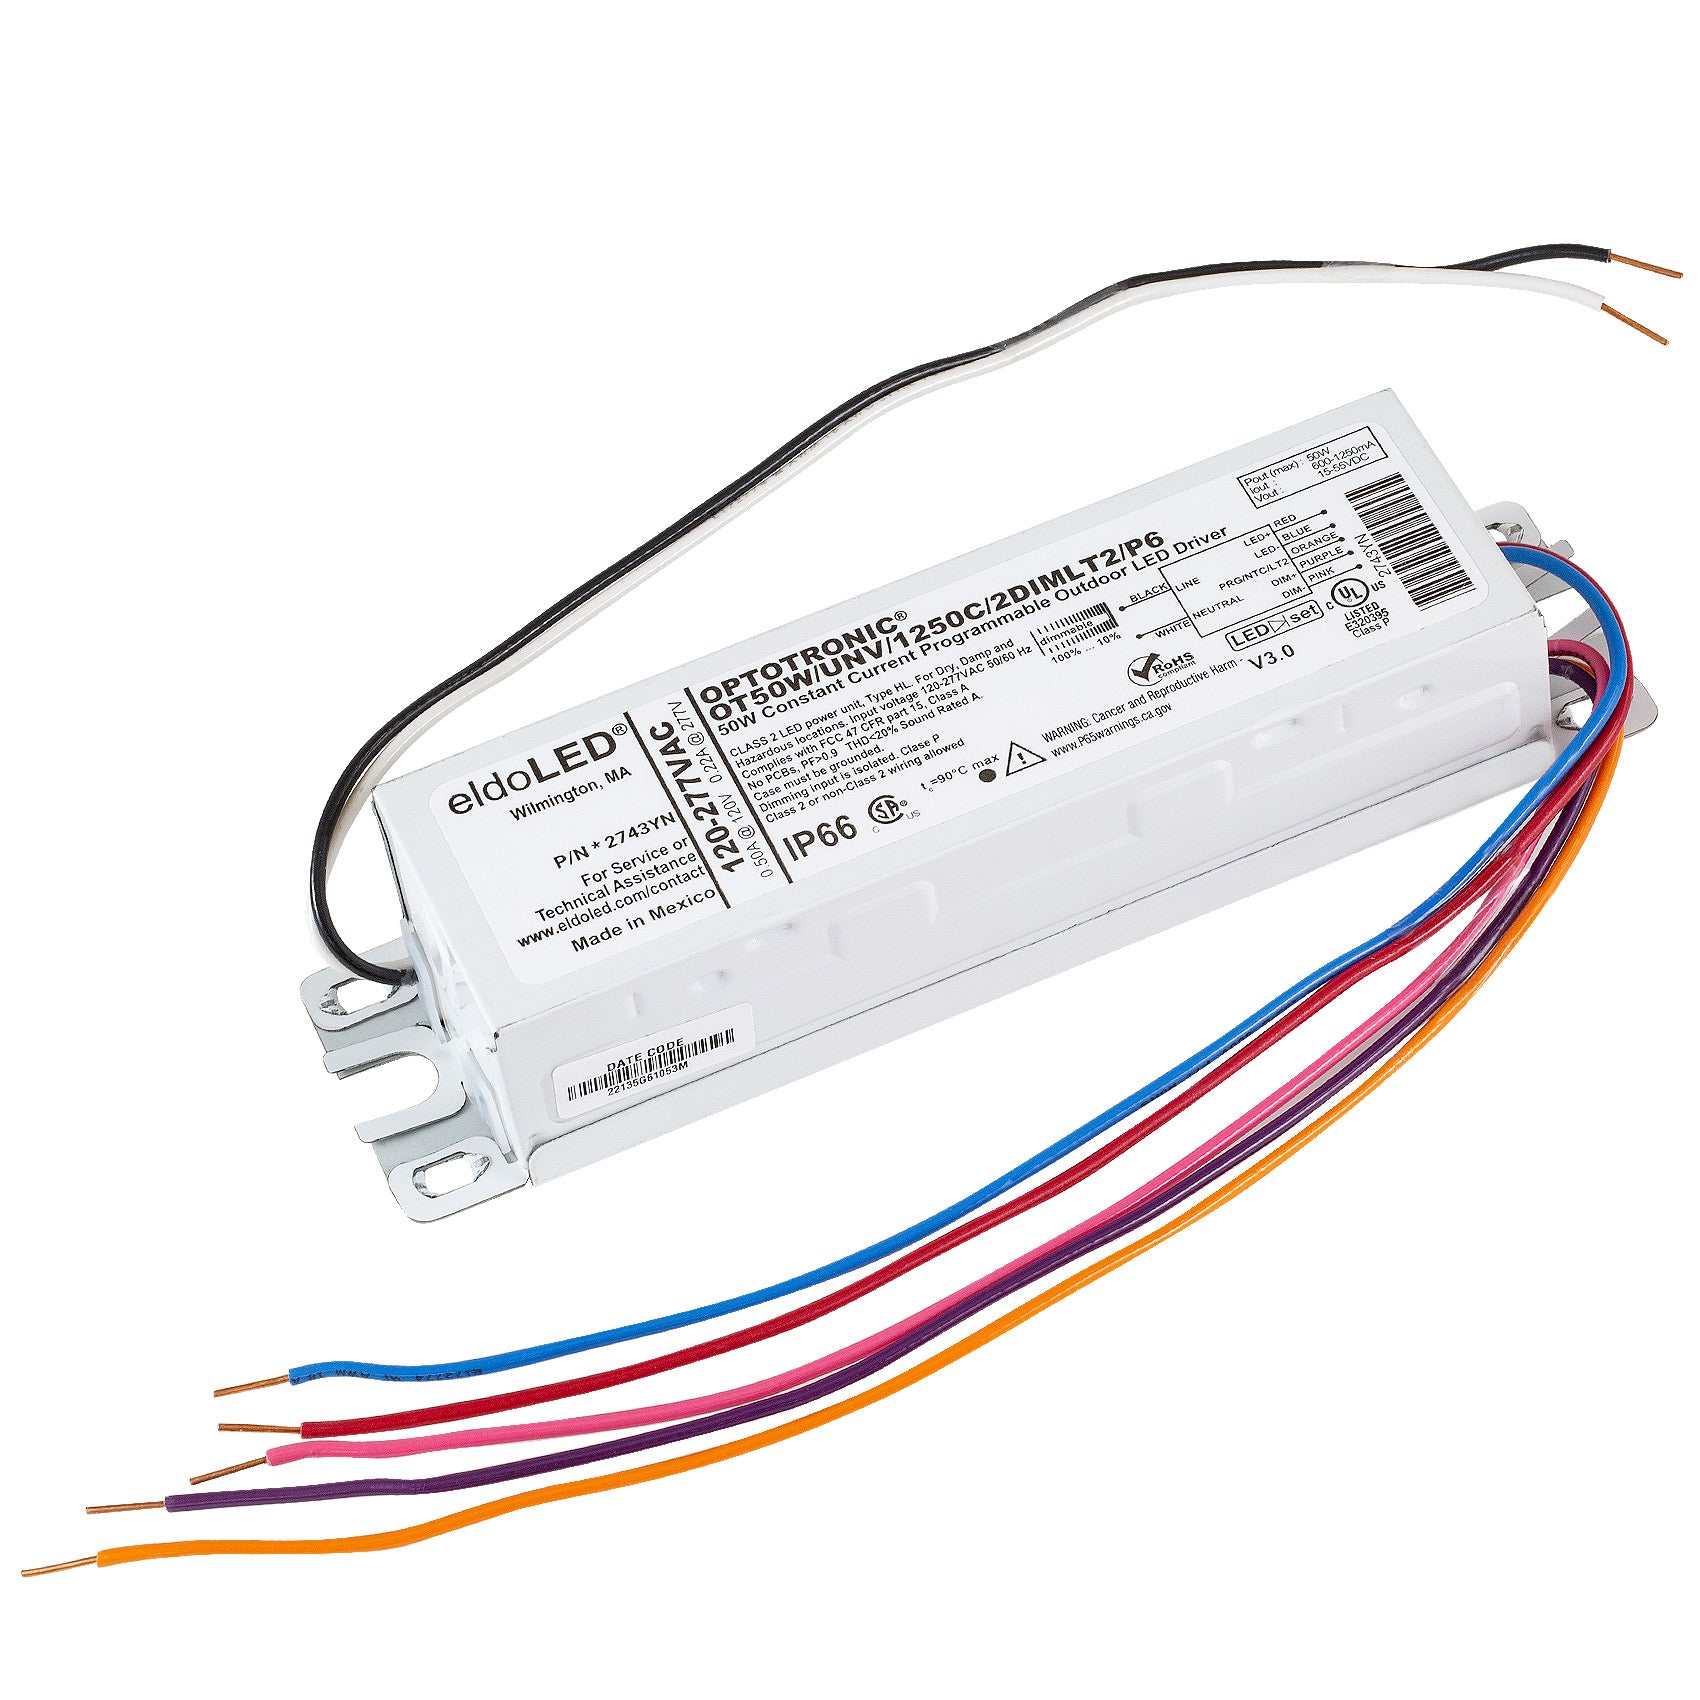 eldoLED *2743YN OPTOTRONIC 50W Constant Current 0-10V Dimmable LED